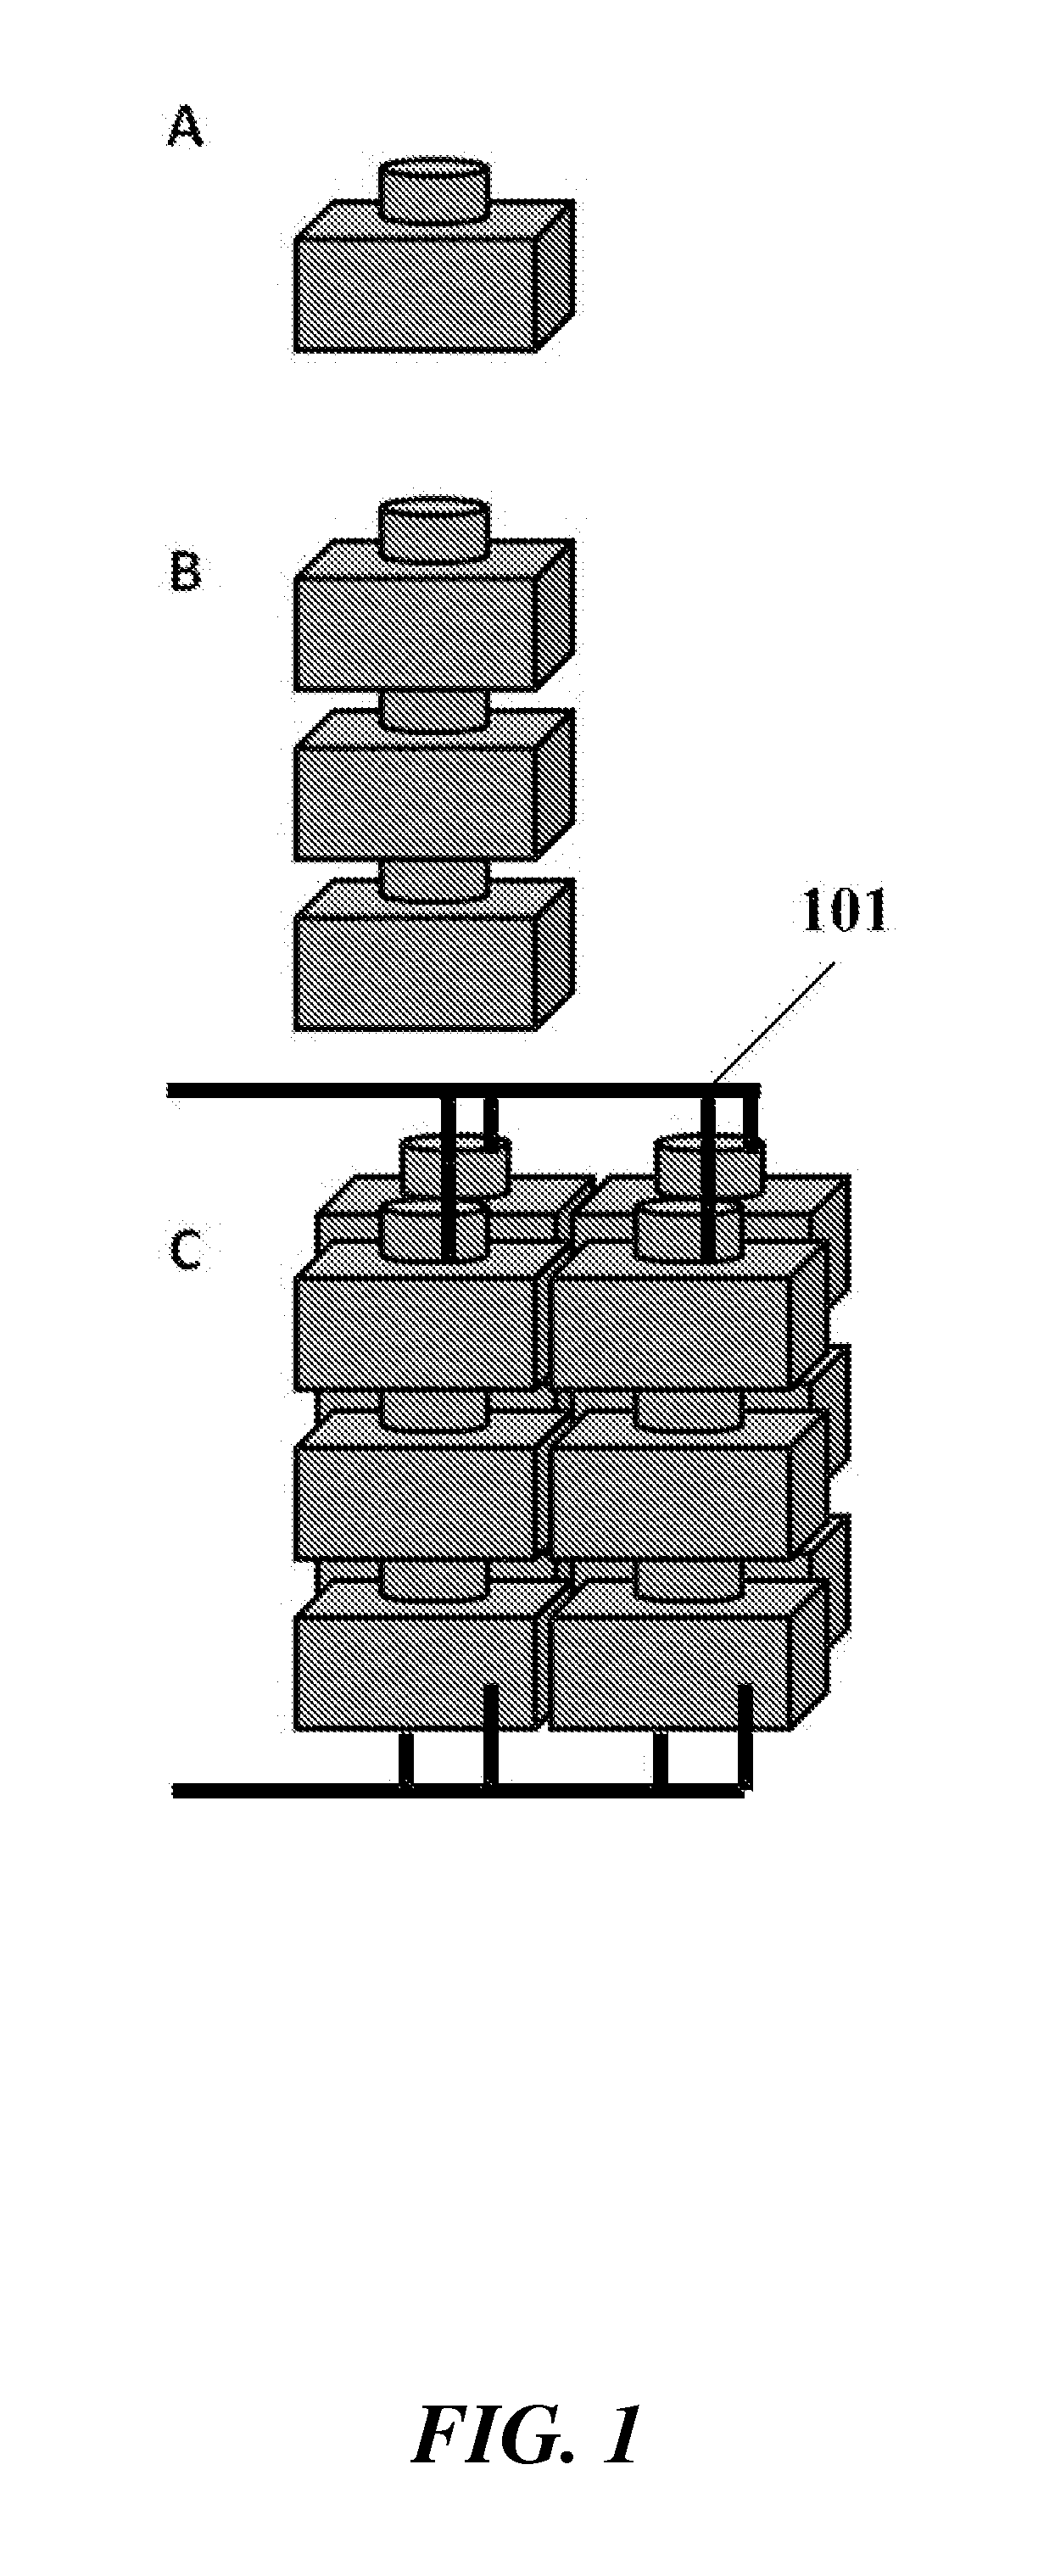 Battery management systems for energy storage devices